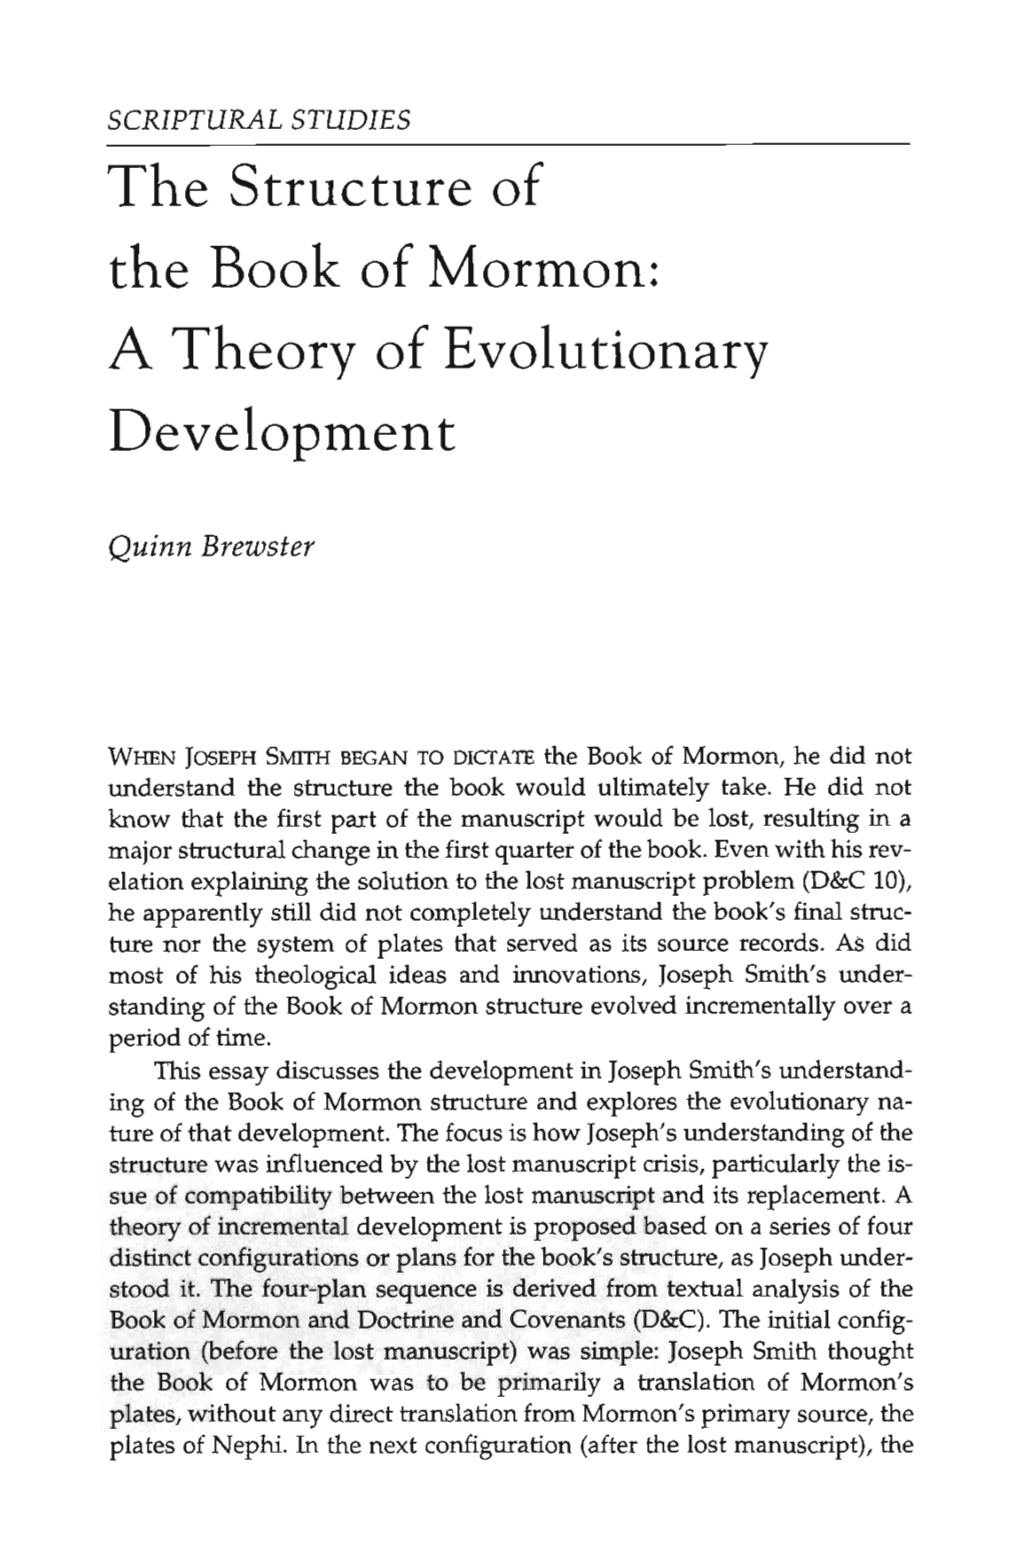 The Structure of the Book of Mormon: a Theory of Evolutionary Development